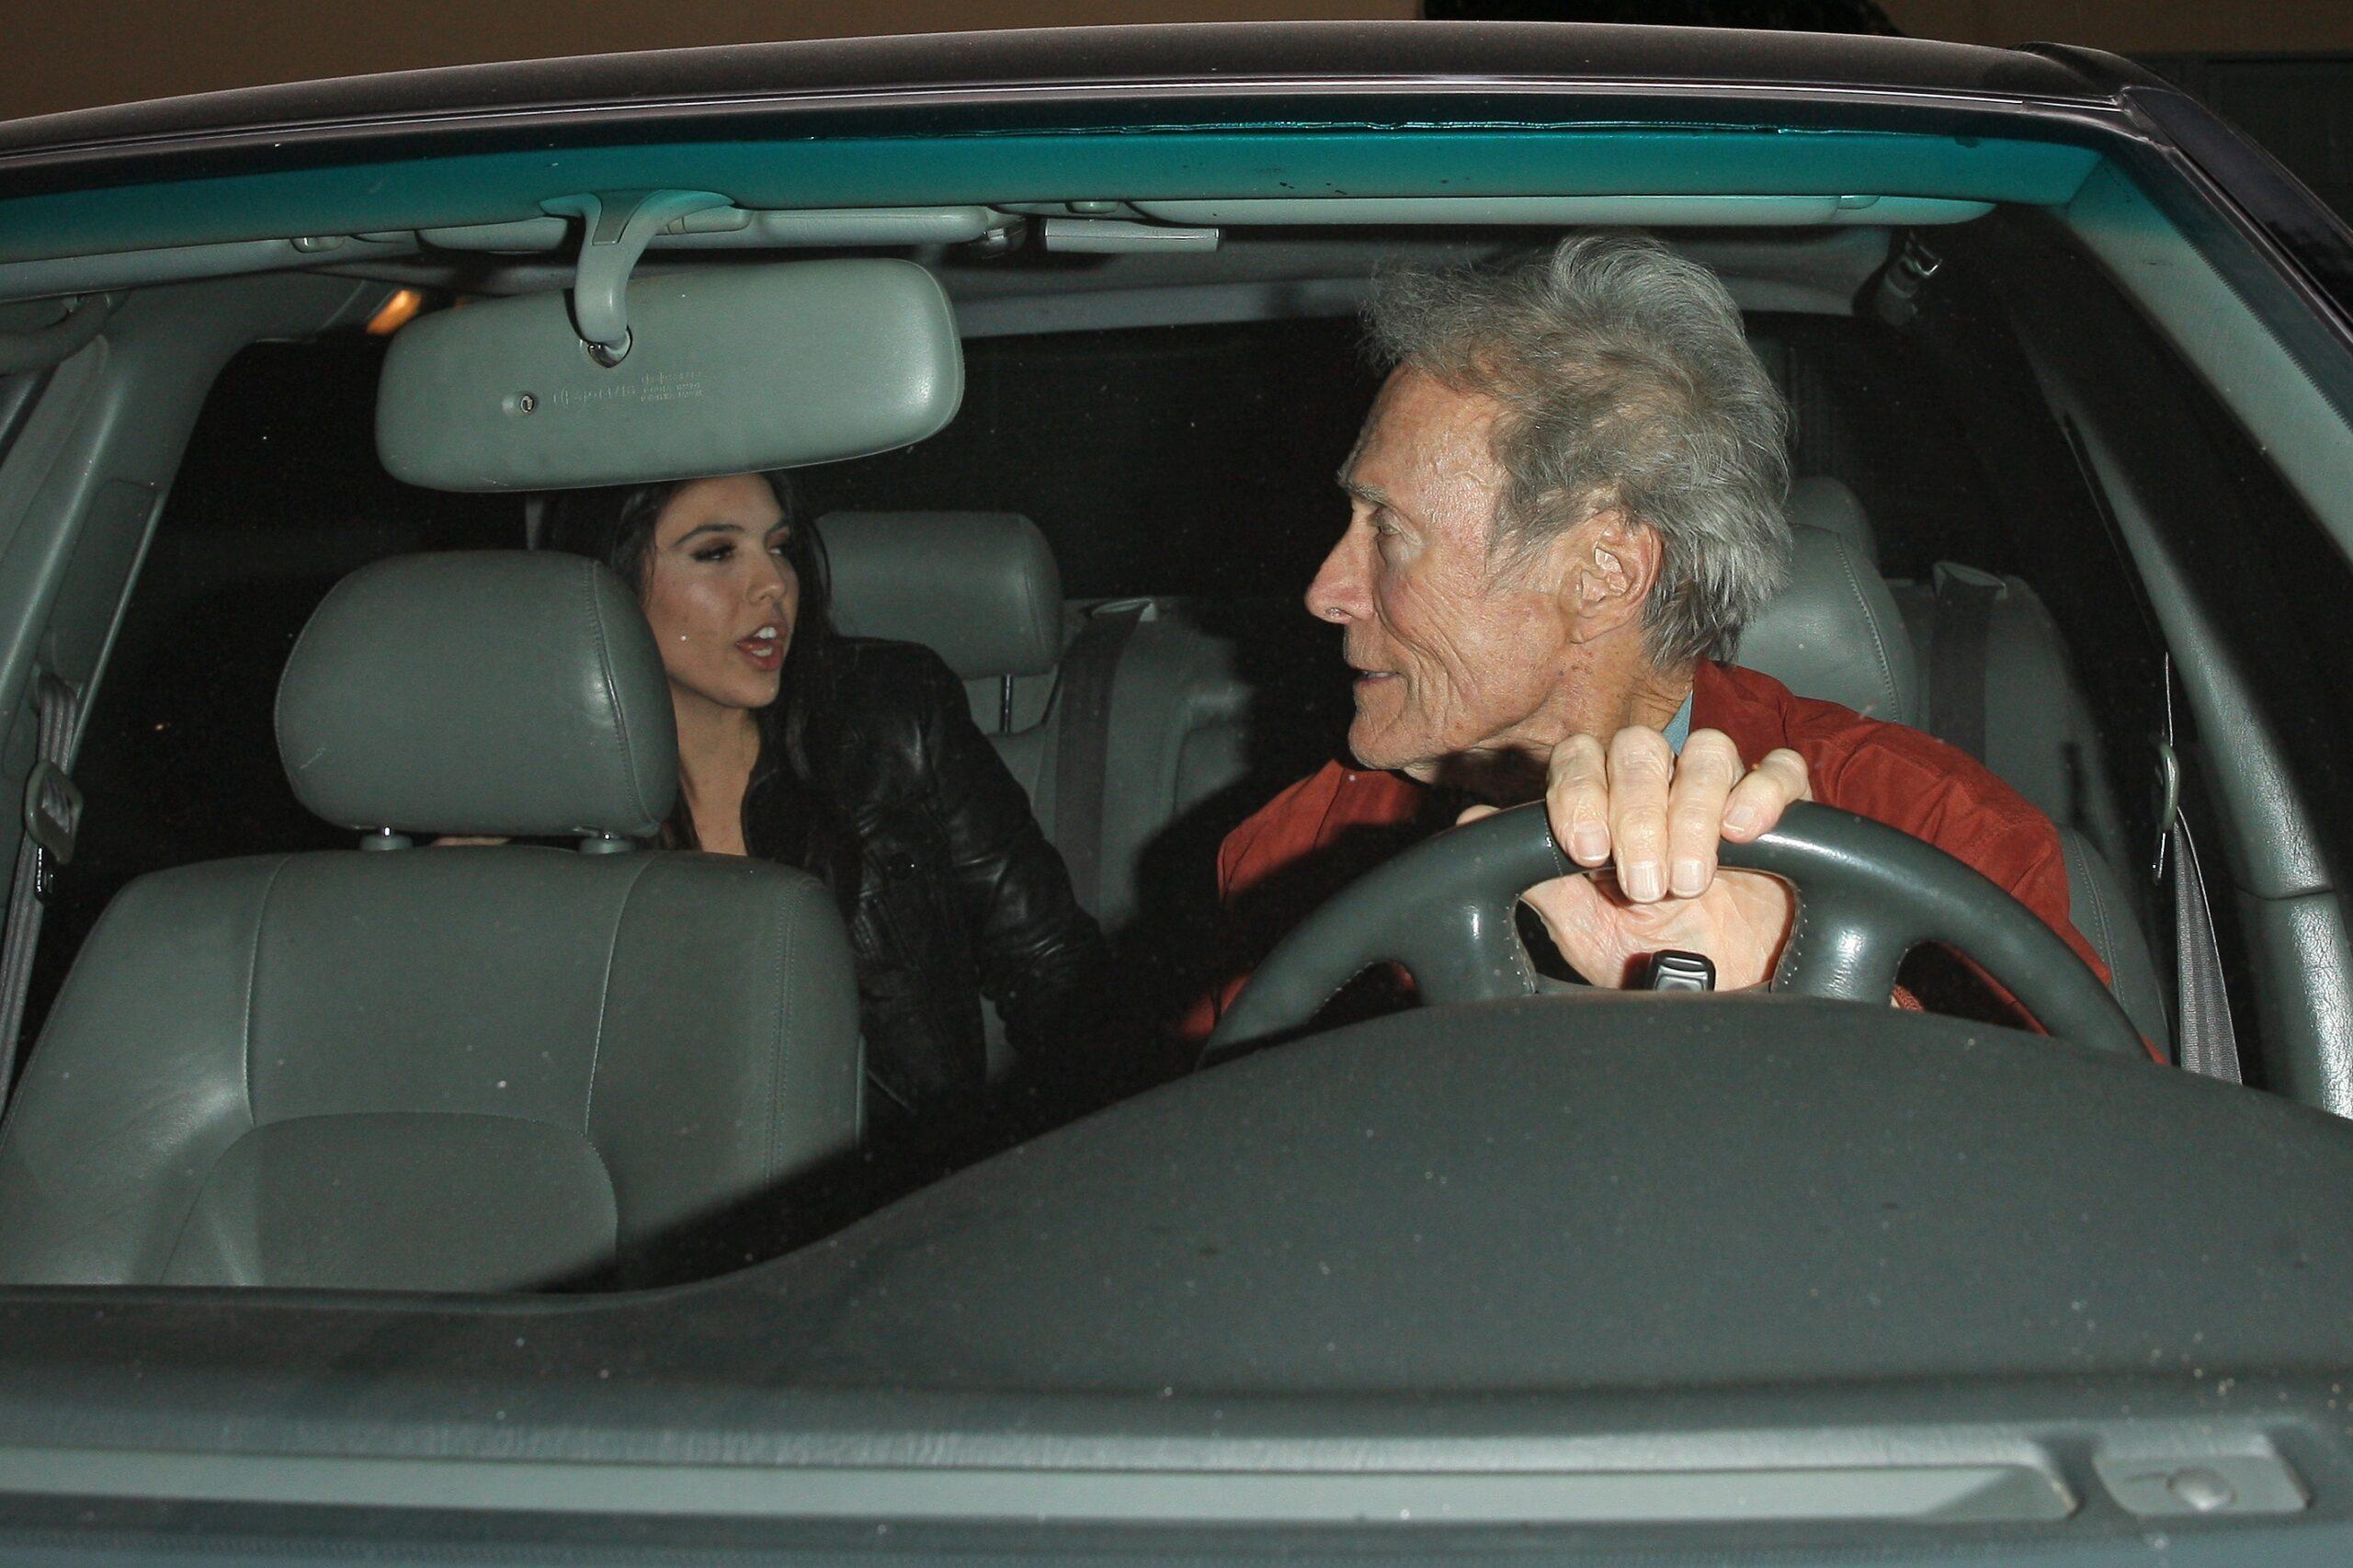 Actor Clint Eastwood 88 is spotted leaving LA hot spot Craig apos s with Mick Jagger apos s former fling Noor Alfallah 23